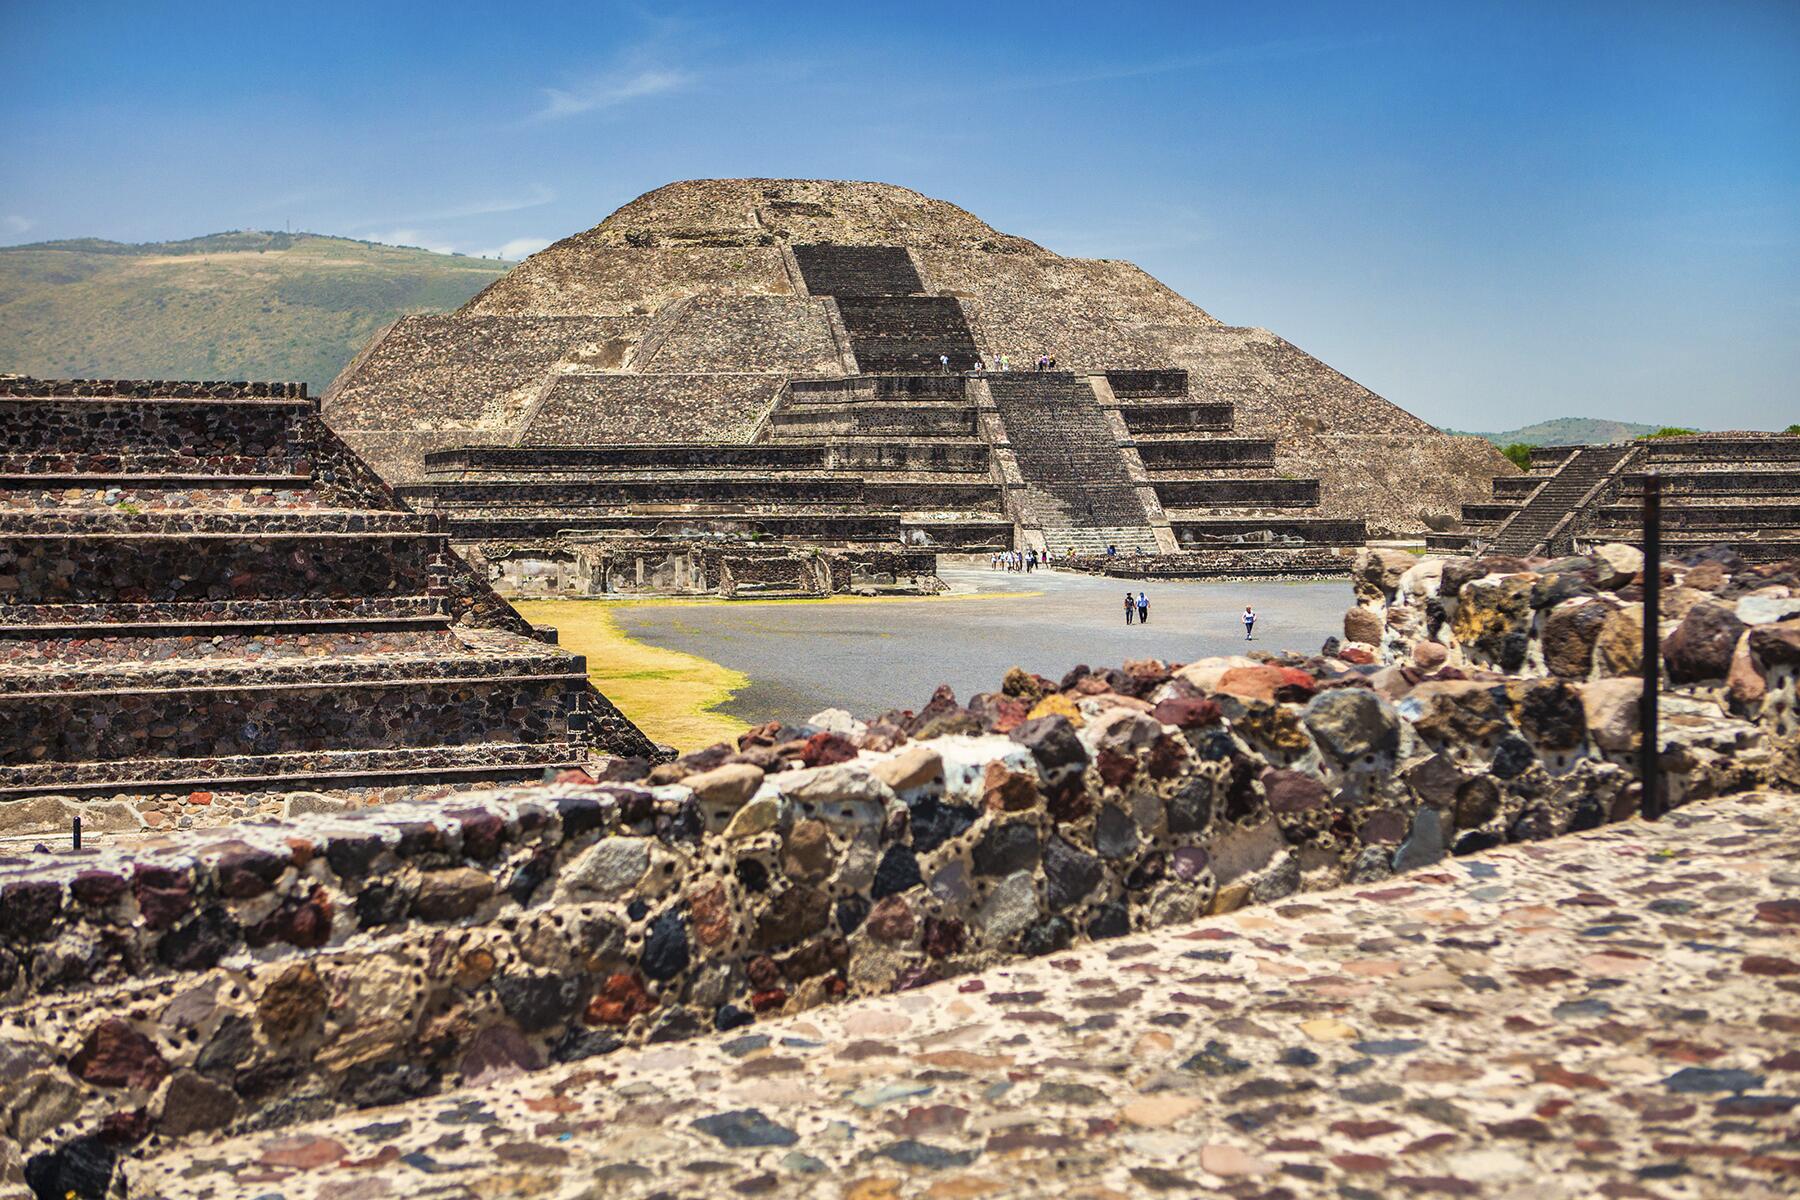 The Best Pyramids That Aren't in Egypt